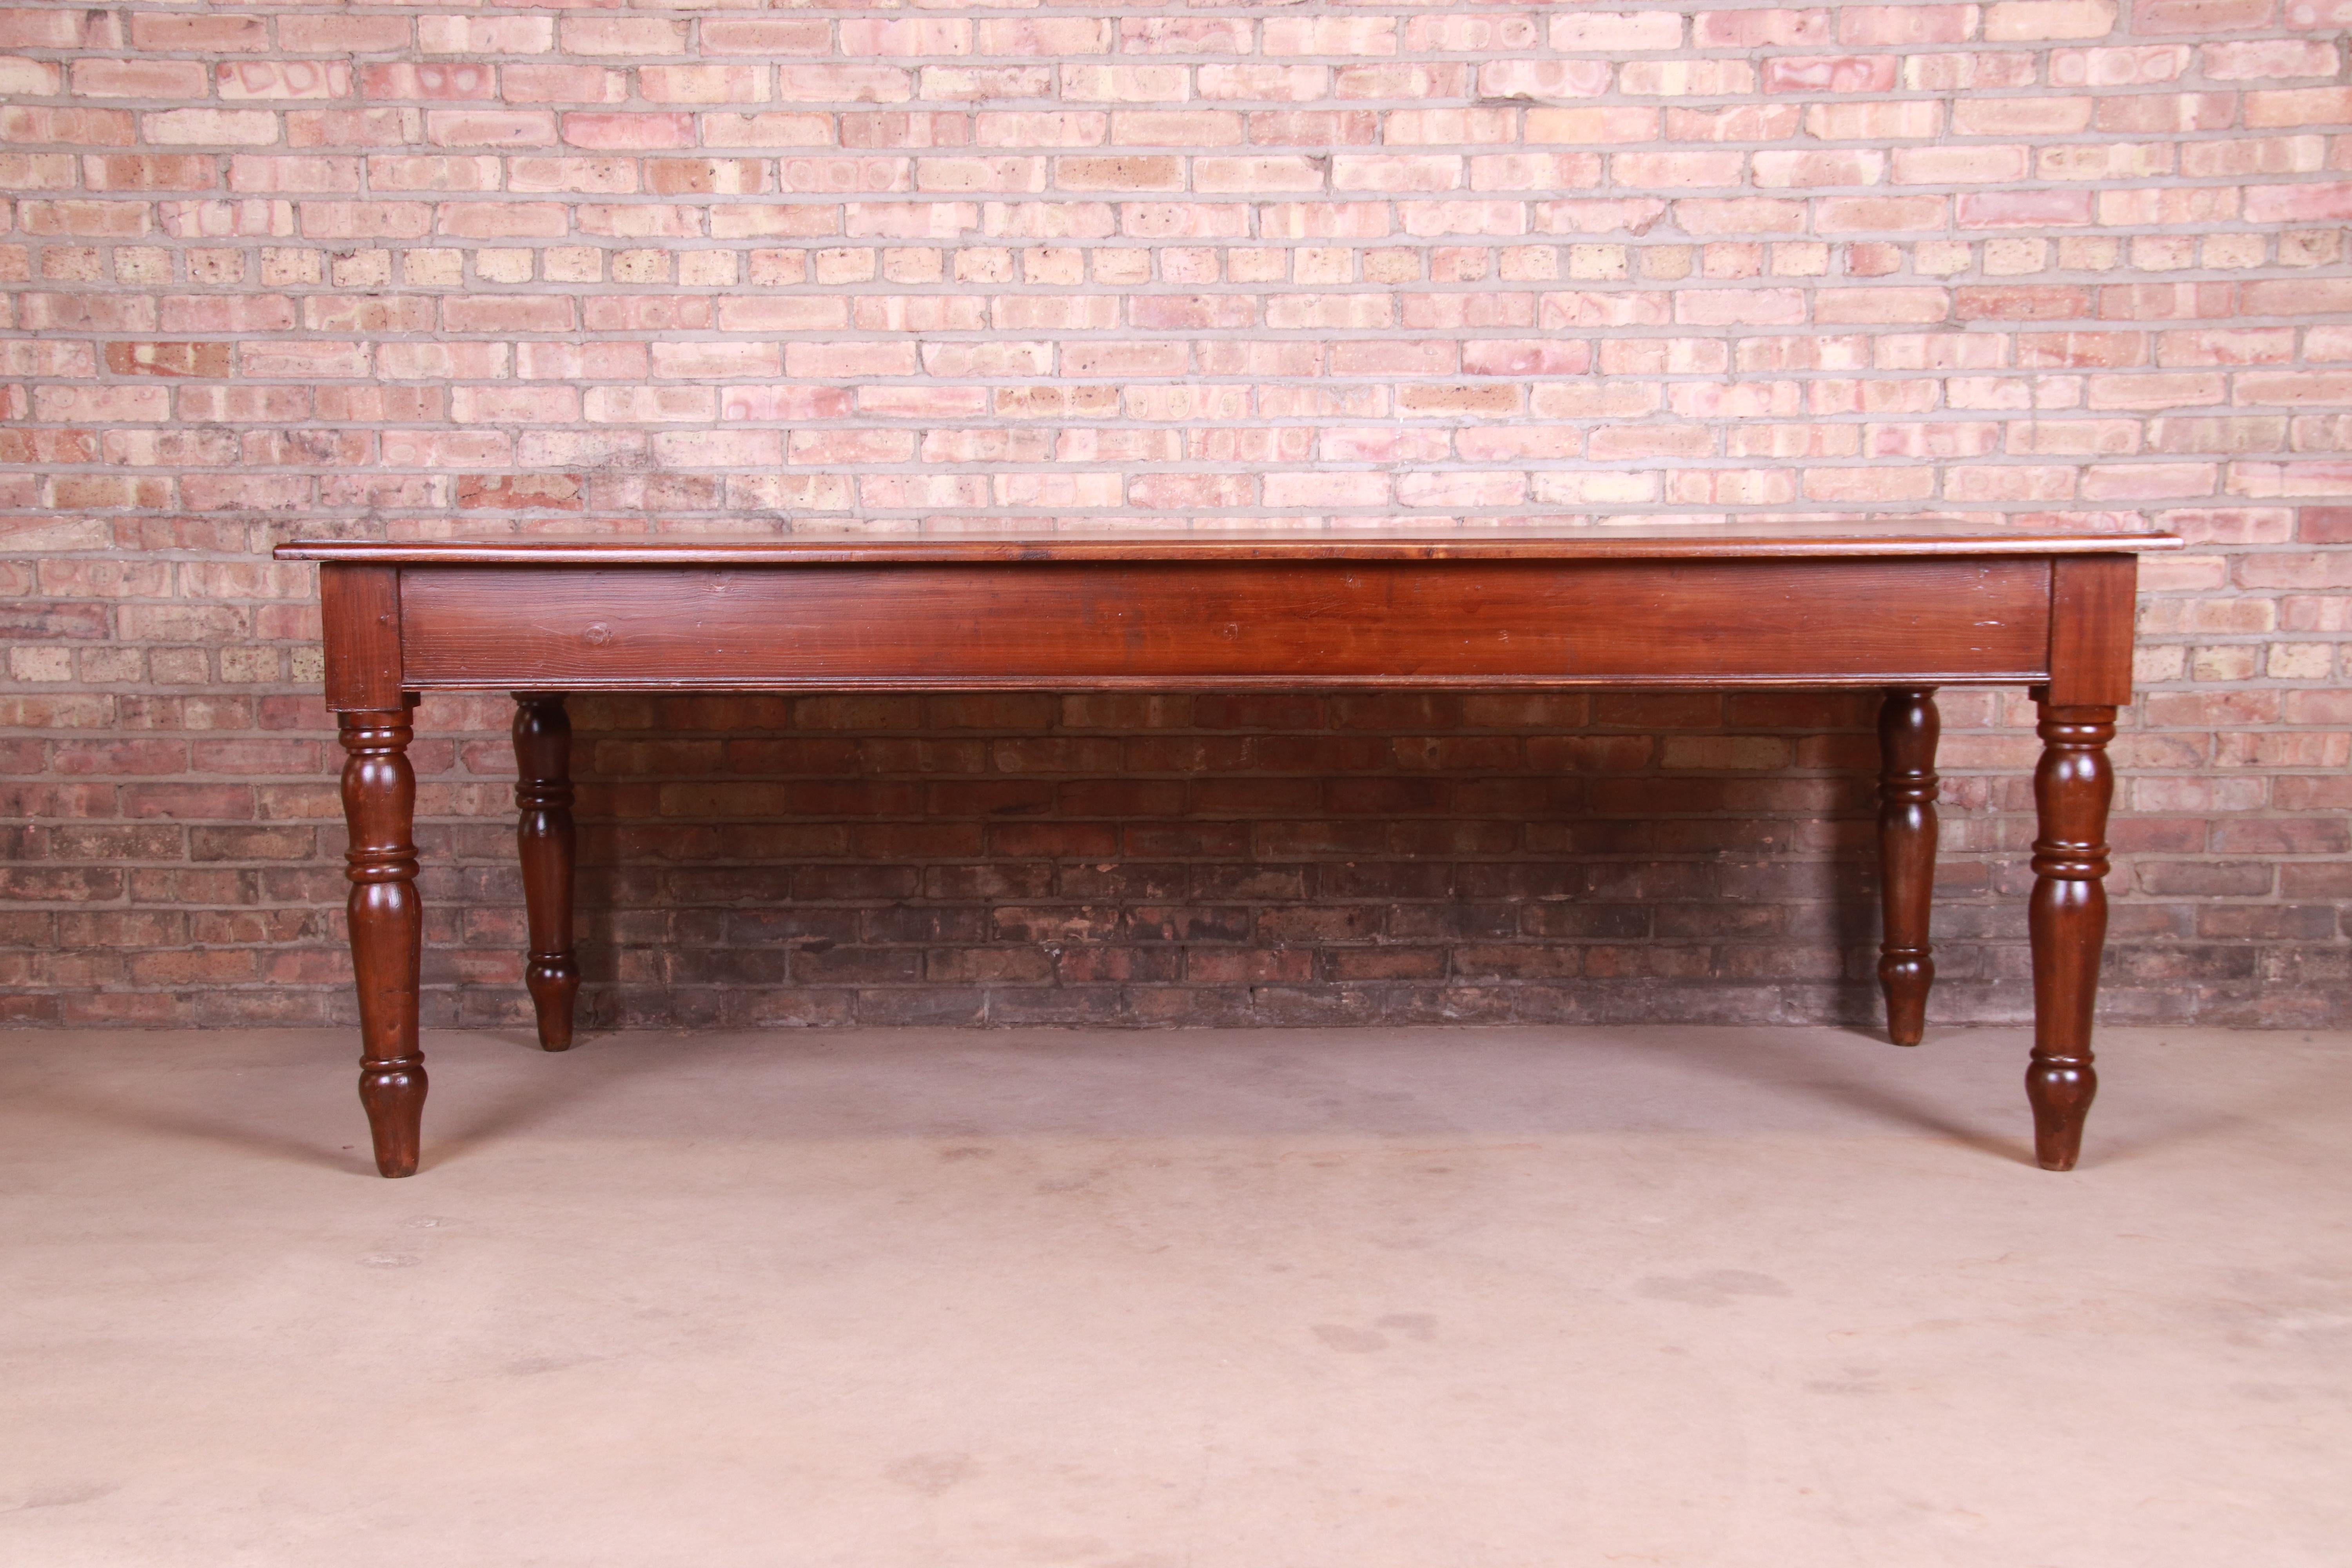 Antique French Provincial Elm Wood Harvest Farm Table With Drawers, Circa 1900 For Sale 8